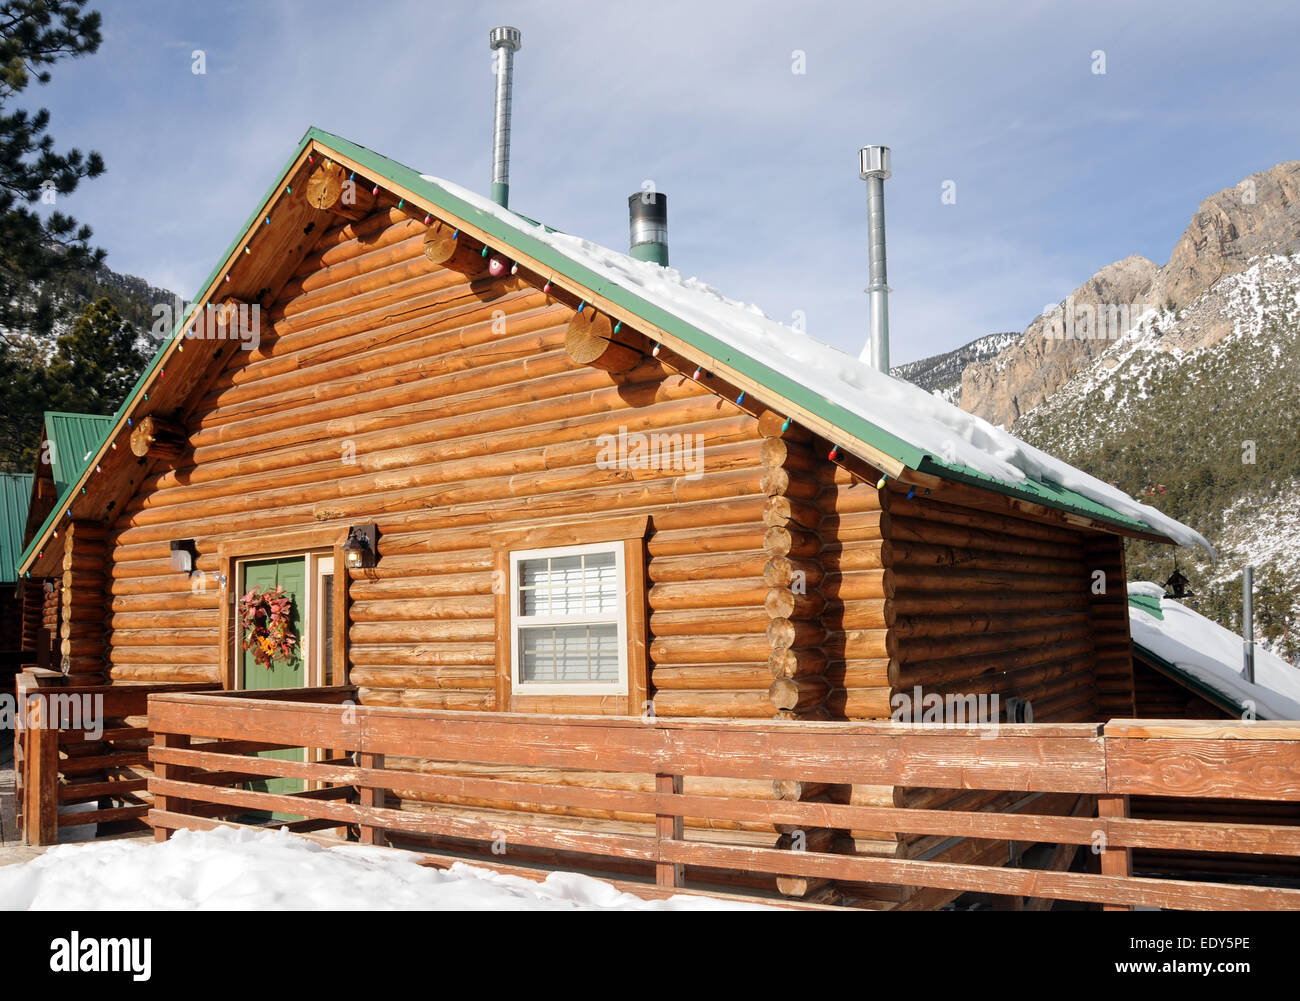 Mountain lodge in resort village surrounded by snow Nevada USA Stock Photo